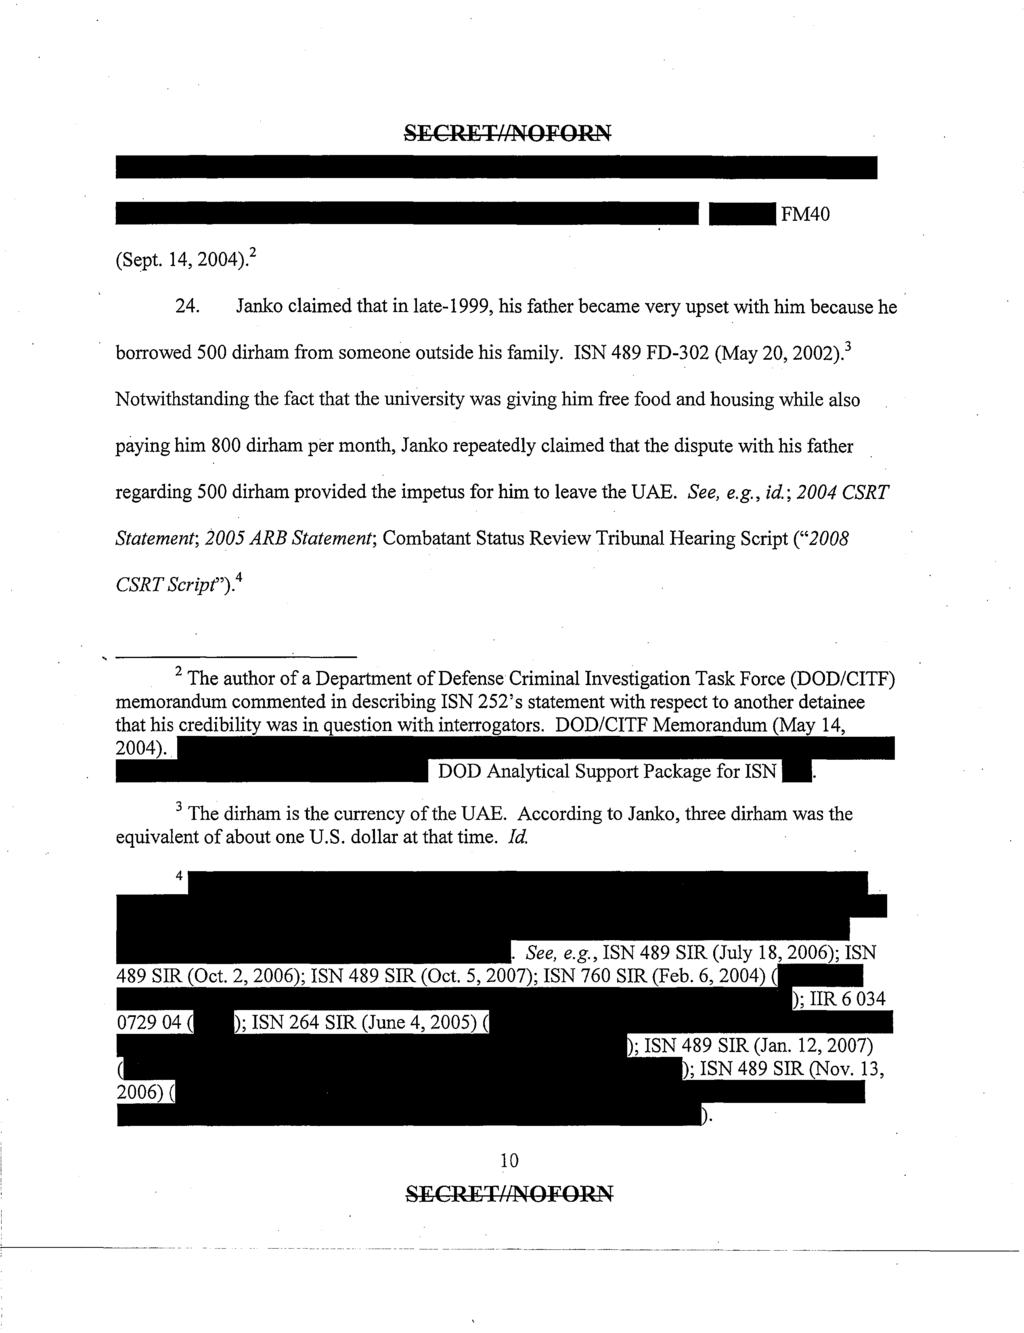 Case 1:05-cv-01310-UNA Document 117-2 Filed 12/05/2008 Page 13 of 24 